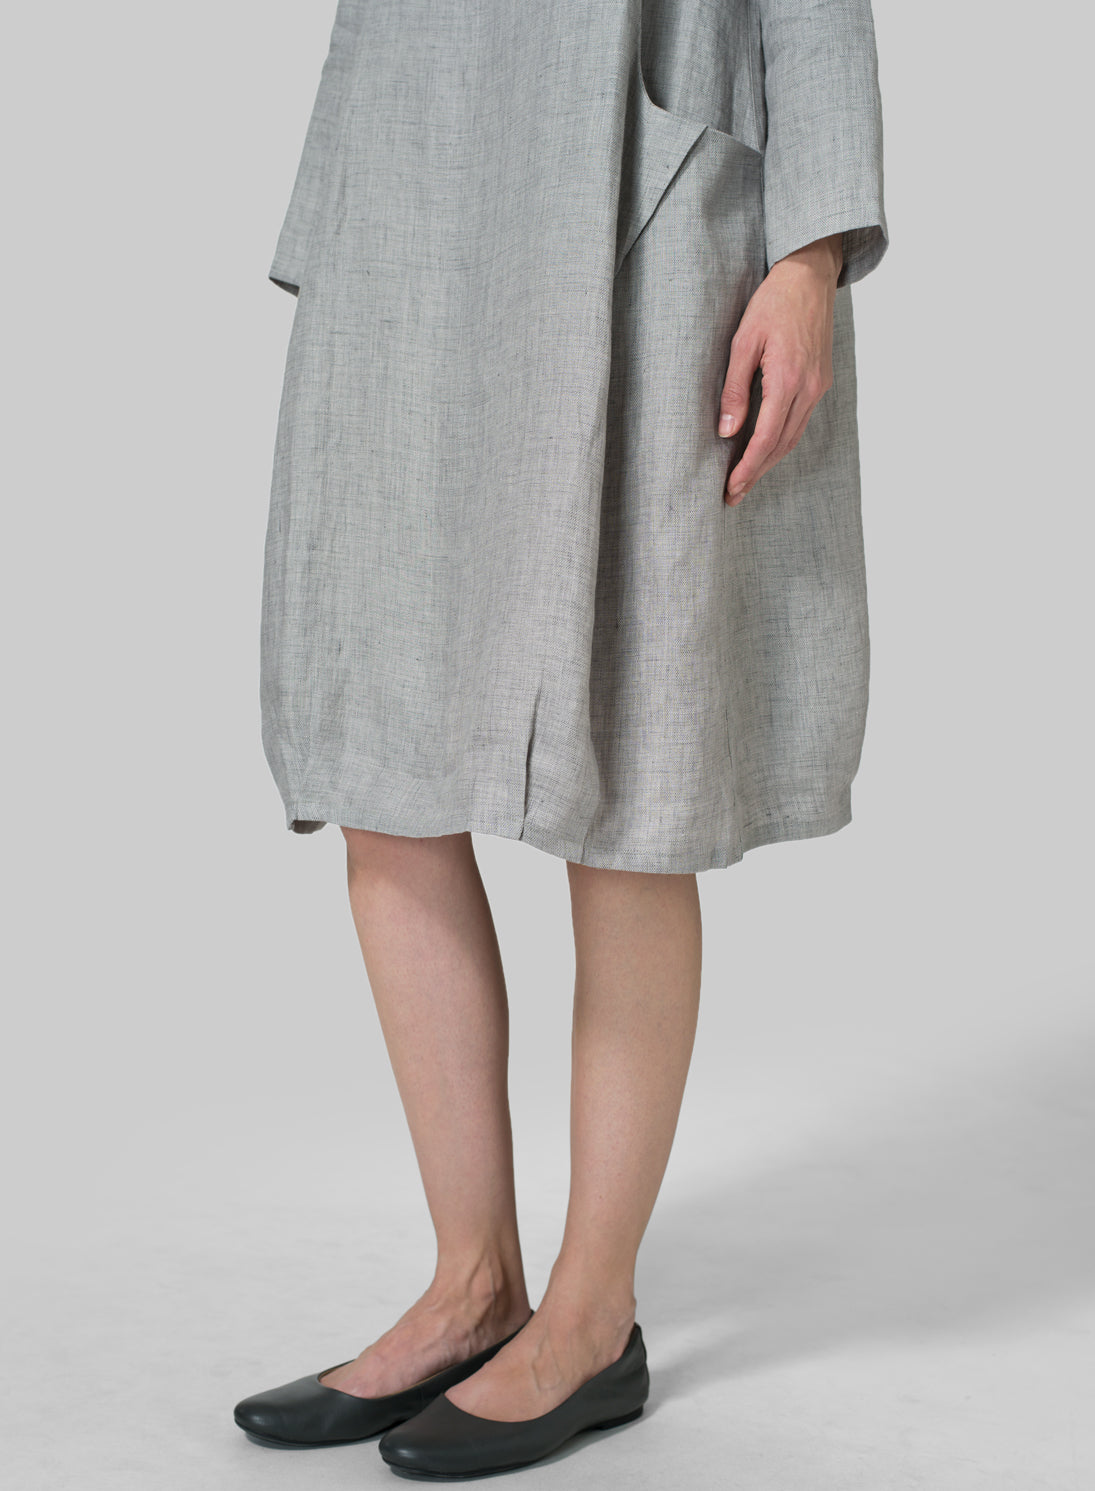 Cotton And Linen Luxe Pocket Dress - boddysize